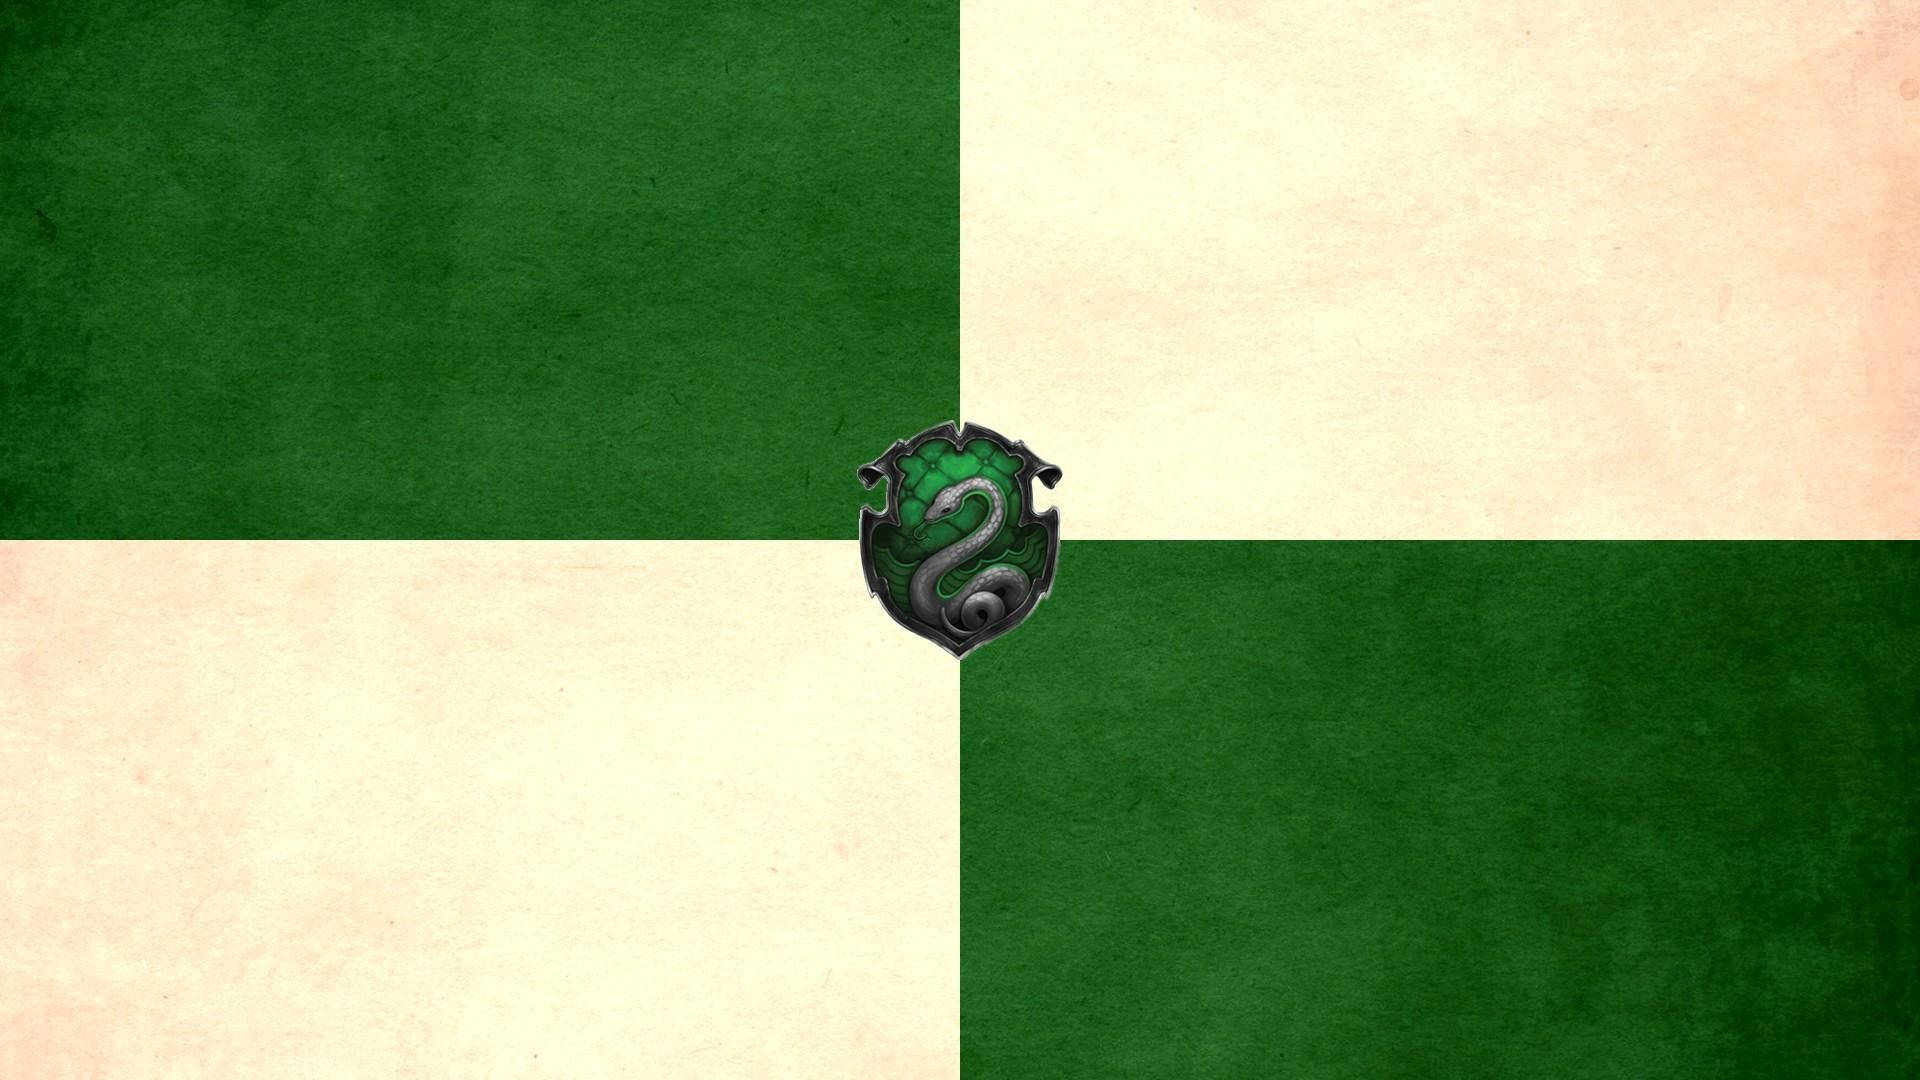 Slytherin 1920X1080 Wallpaper and Background Image